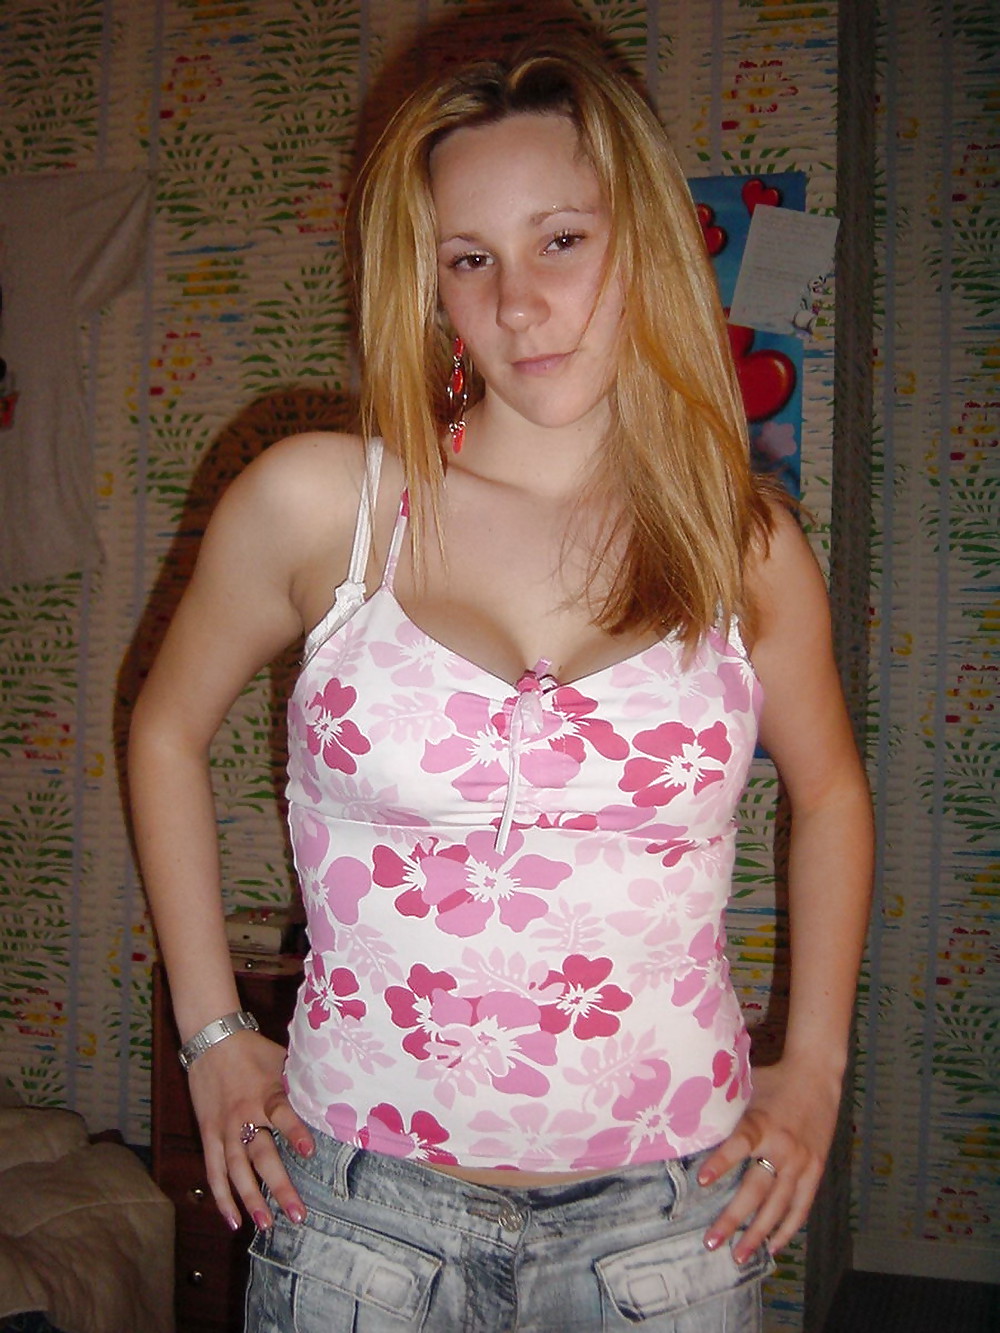 YOUNG AND SO HORNY 30 adult photos